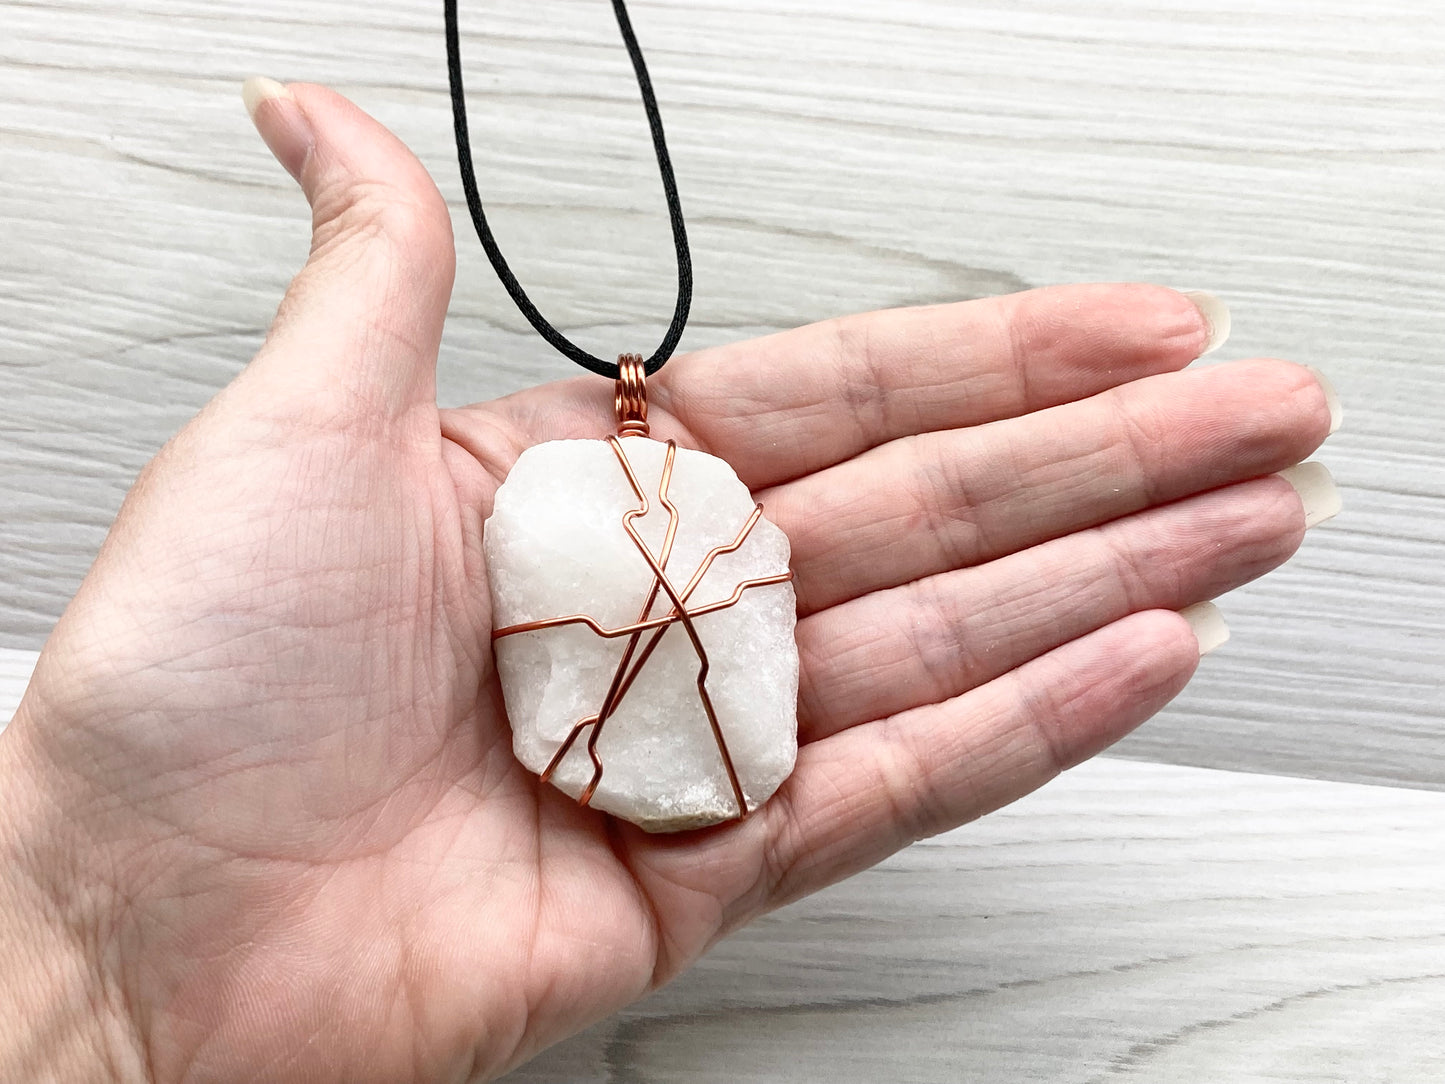 Raw White Onyx Necklace. Rough White Onyx Crystal Wrapped With Copper Wire. Pendant Comes On A Black Lobster Clasp Chain. Pendant Measure 2.25 X 1 Inches.